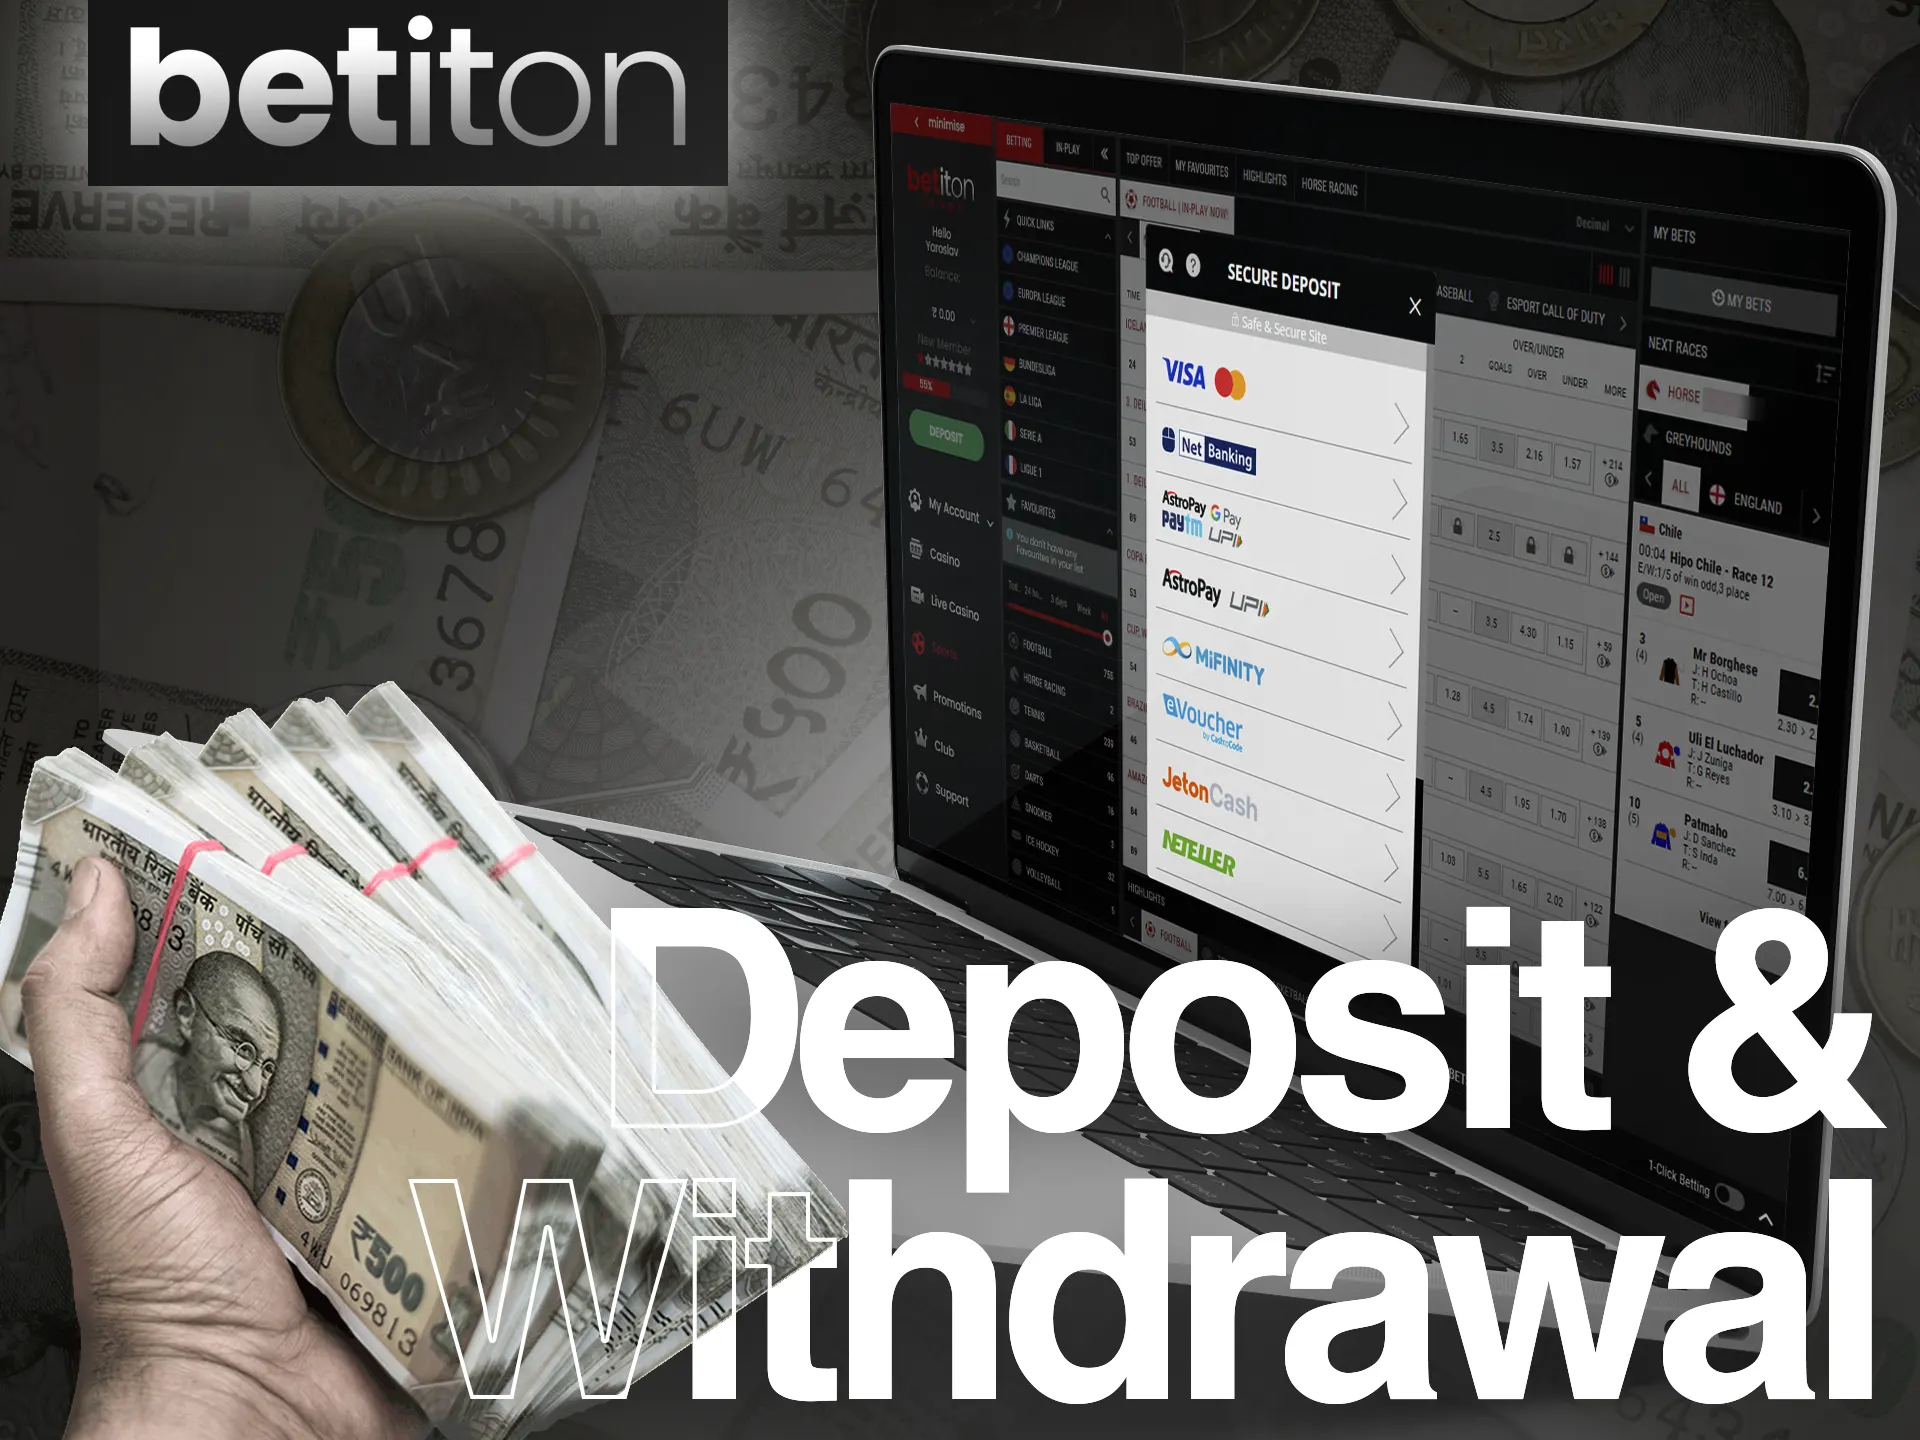 It's easy to deposit and withdraw money at the Betiton.